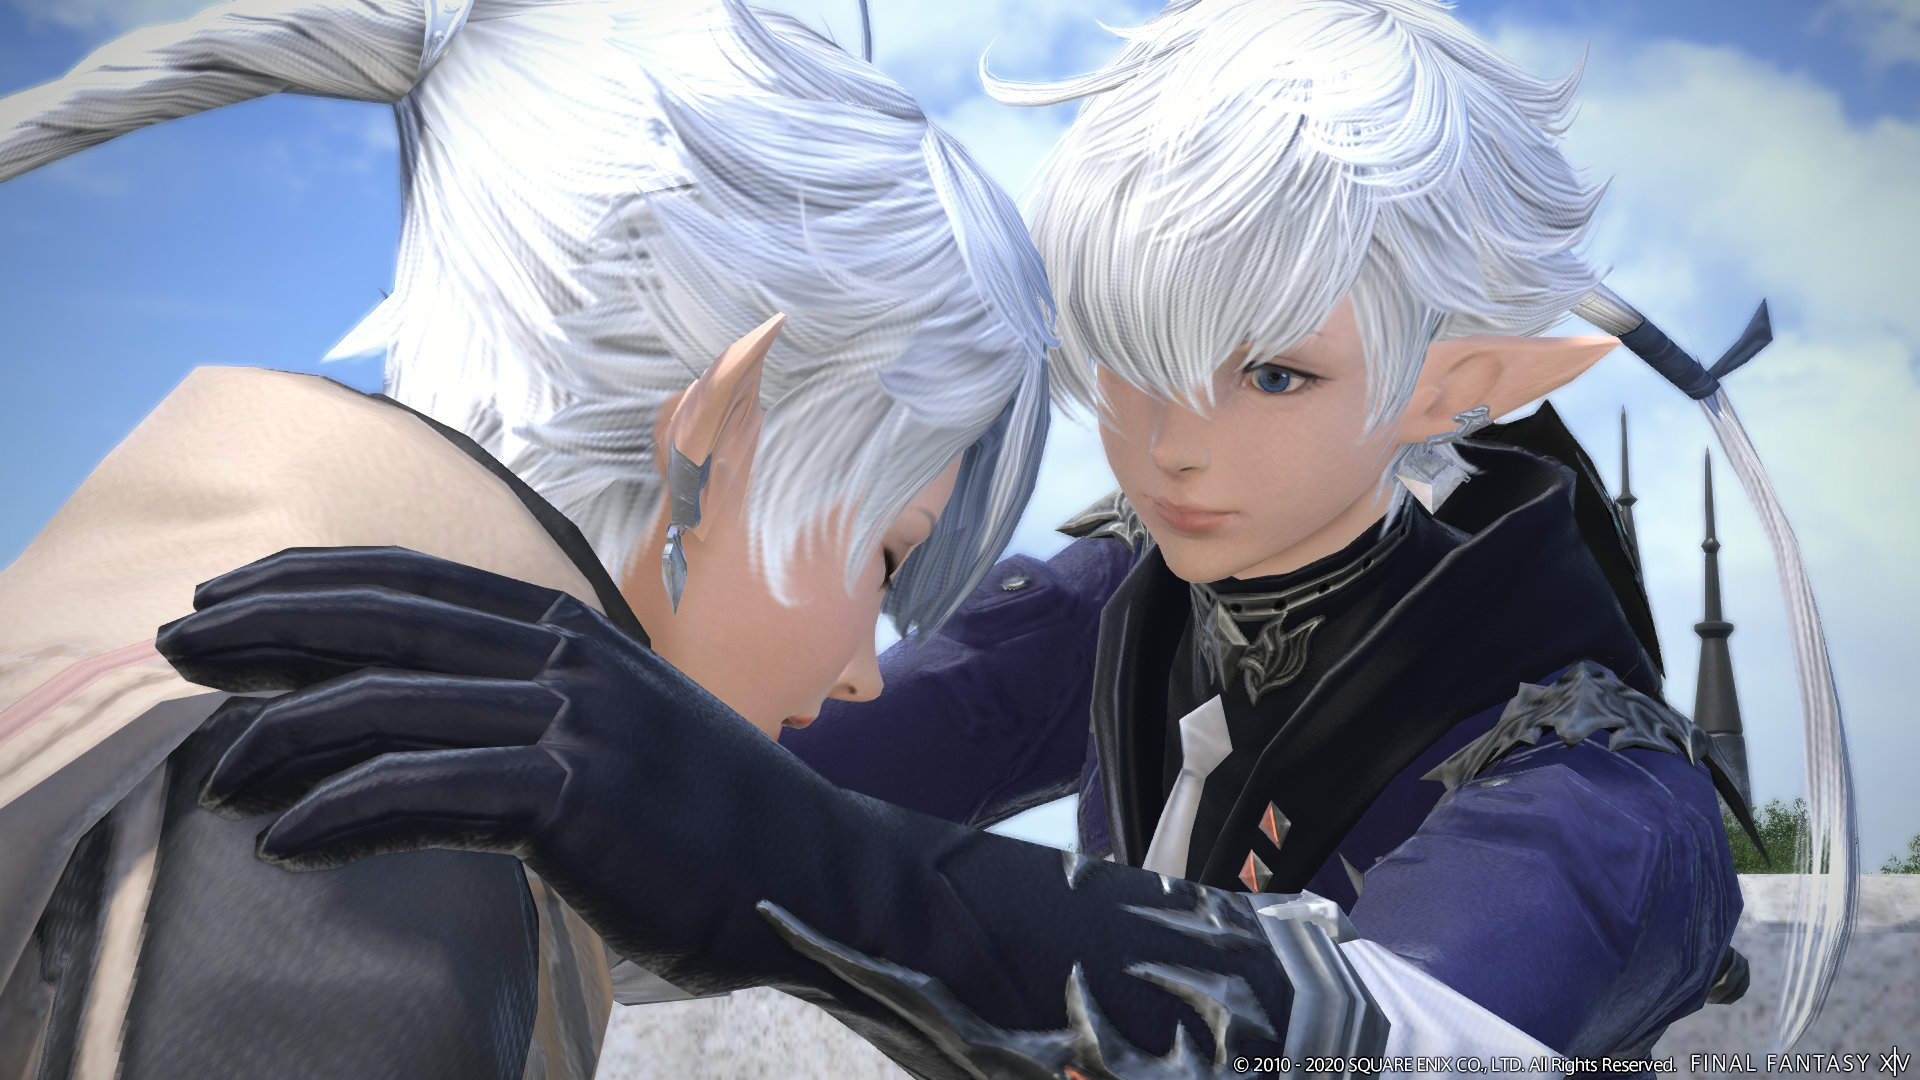 Screenshot From Final Fantasy XIV Shadowbringers Featuring Alisae And Alphinaud Comforting One Another